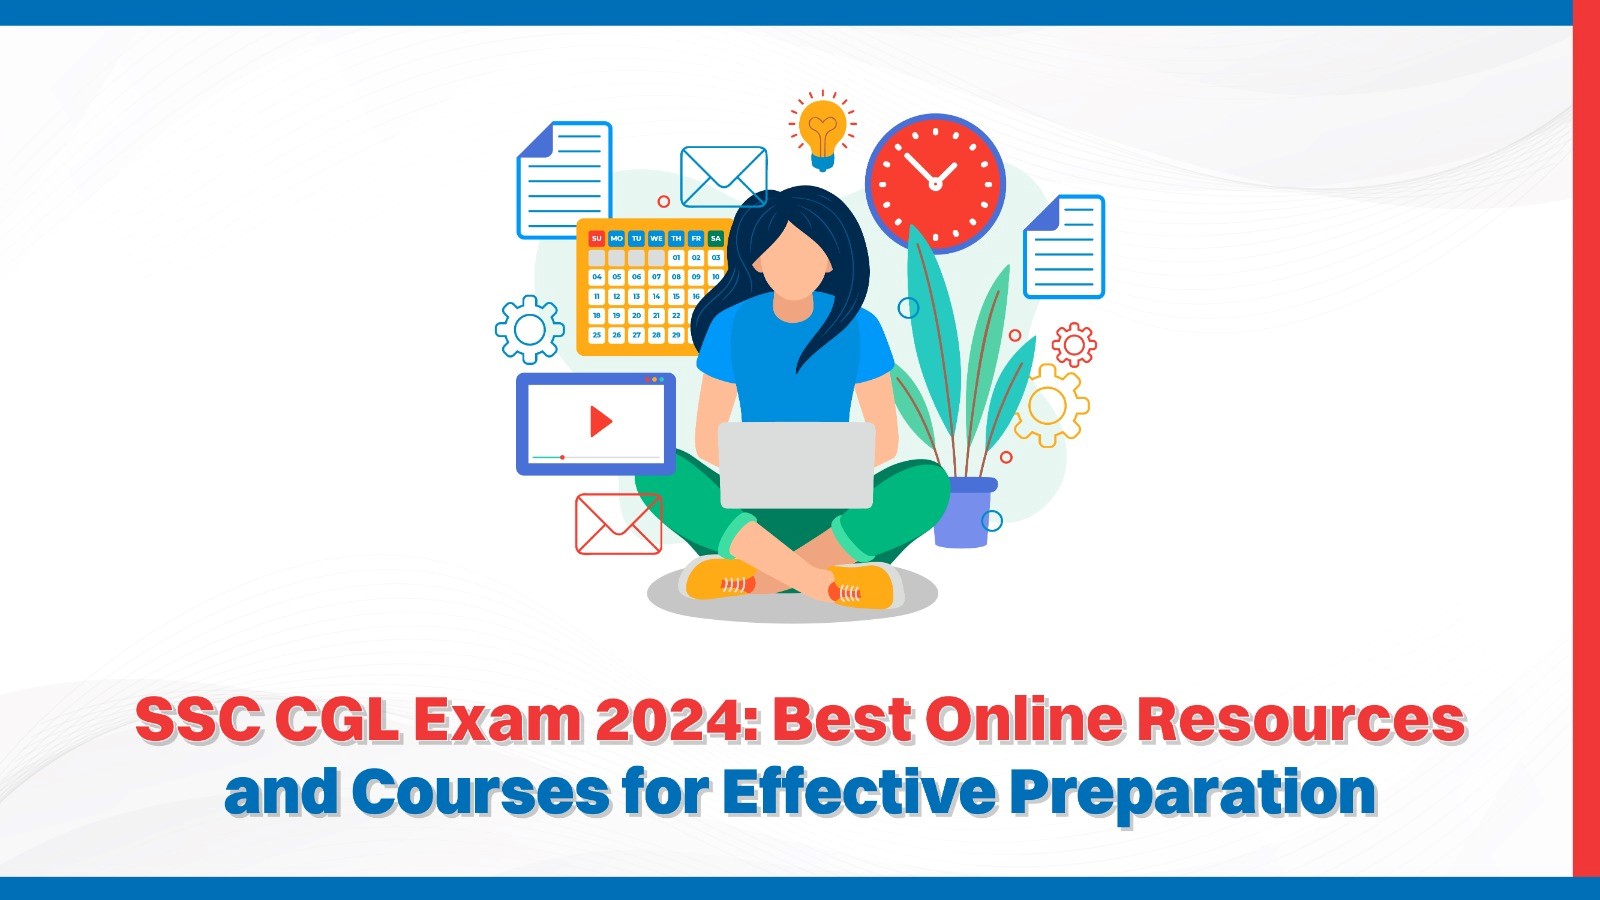 SSC CGL Exam 2024 Best Online Resources and Courses for Effective Preparation.jpg